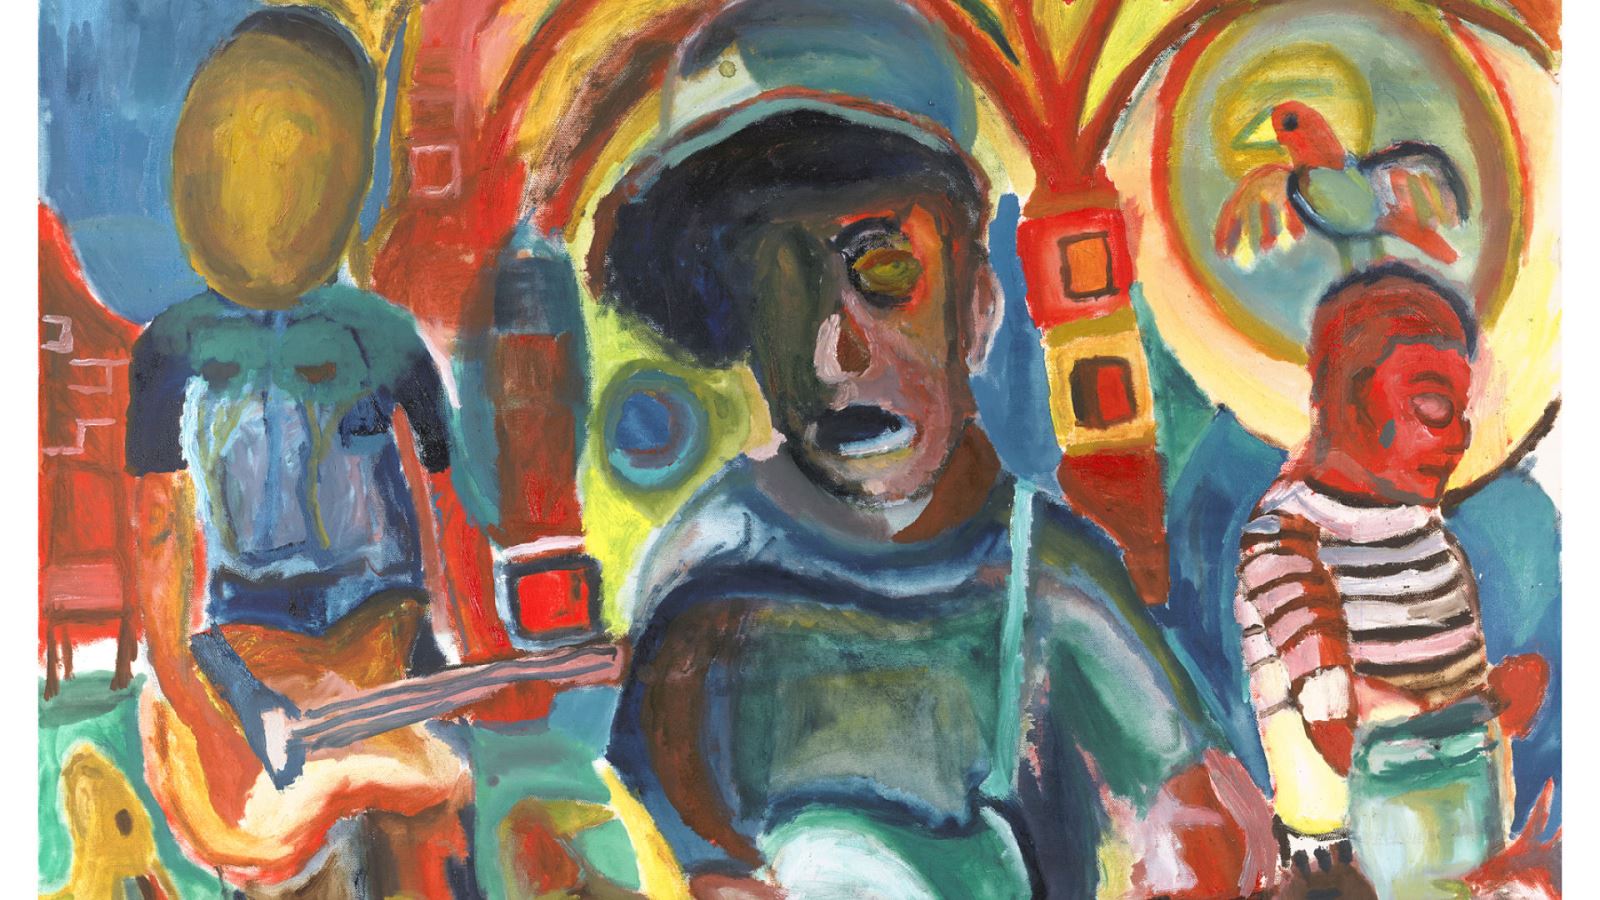 Part of a painting depicting musicians in Bristol. The image uses bright colours and broad strokes and is by artist Jeff Johns.